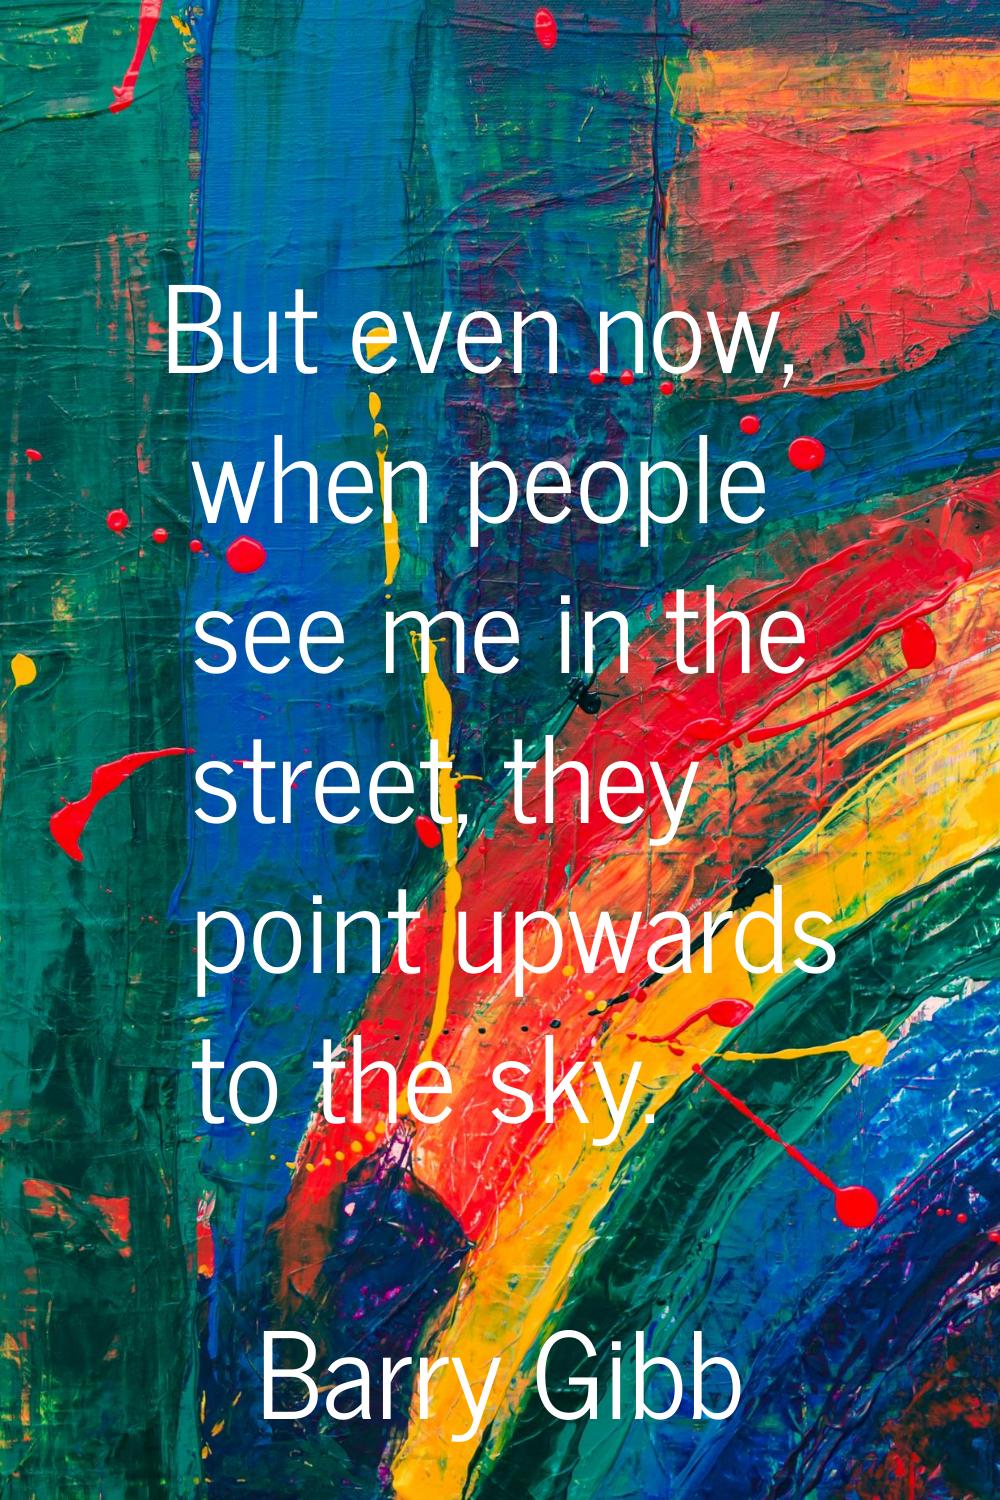 But even now, when people see me in the street, they point upwards to the sky.